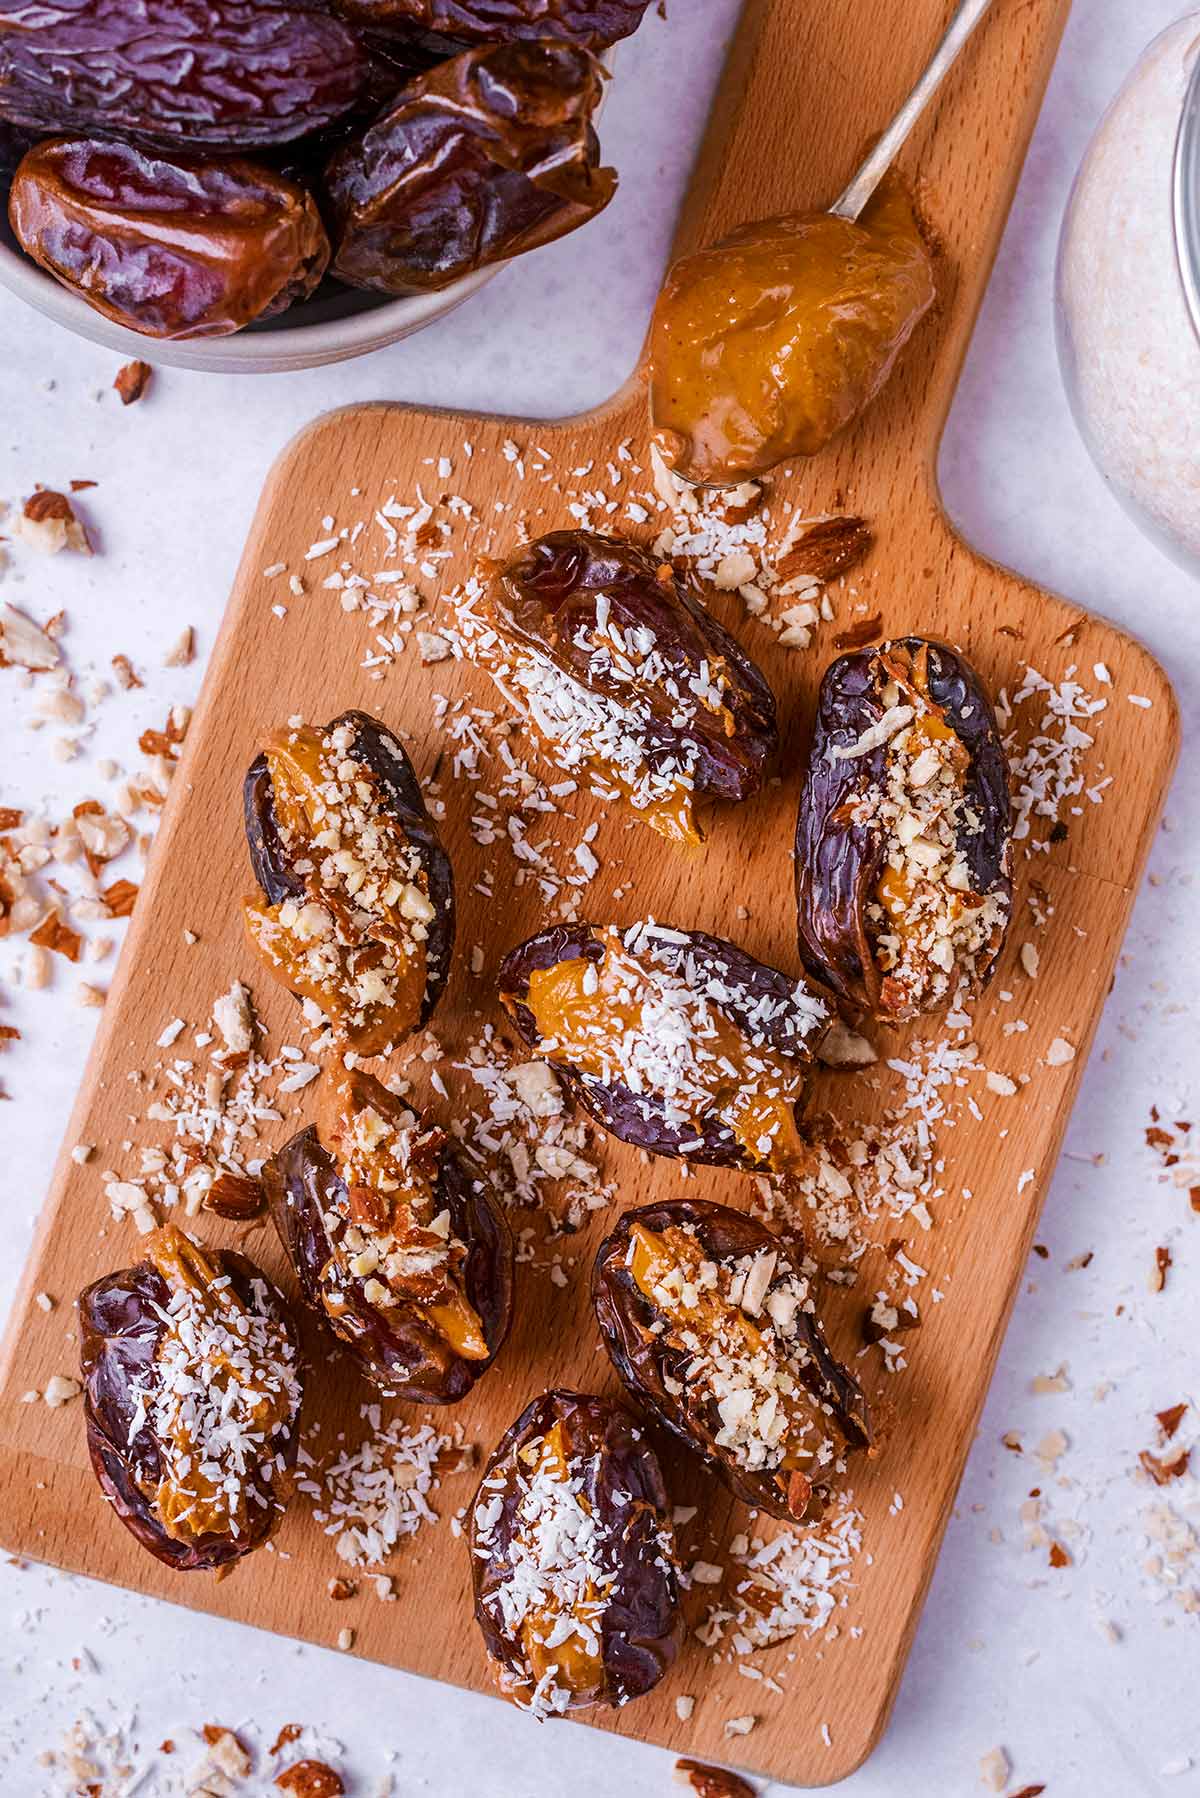 Eight dates stuffed with nut butter and topped with coconut and nuts.